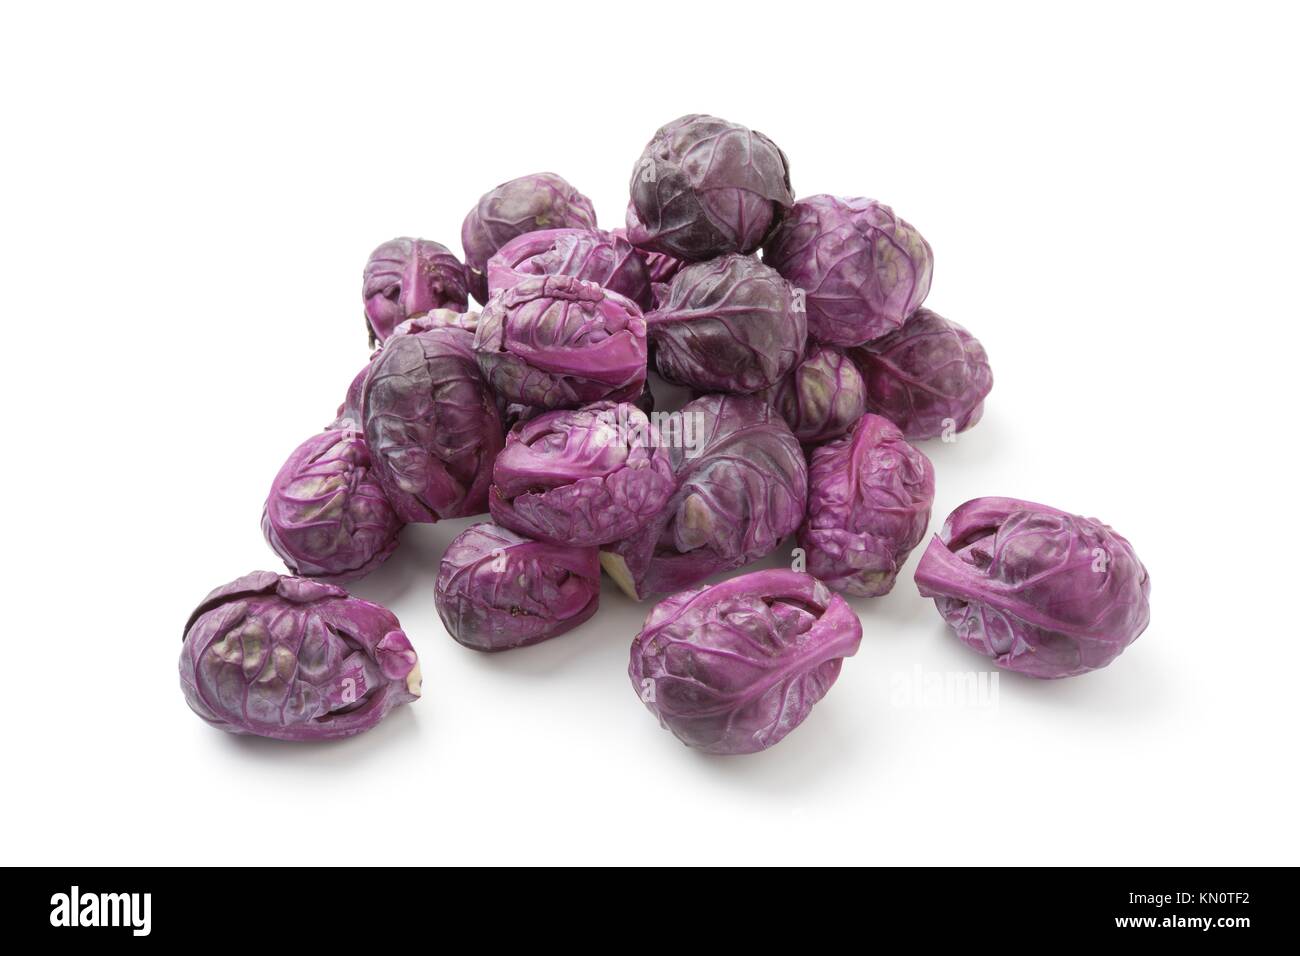 Red Rubine Brussels Sprouts High Resolution Stock Photography and Images -  Alamy